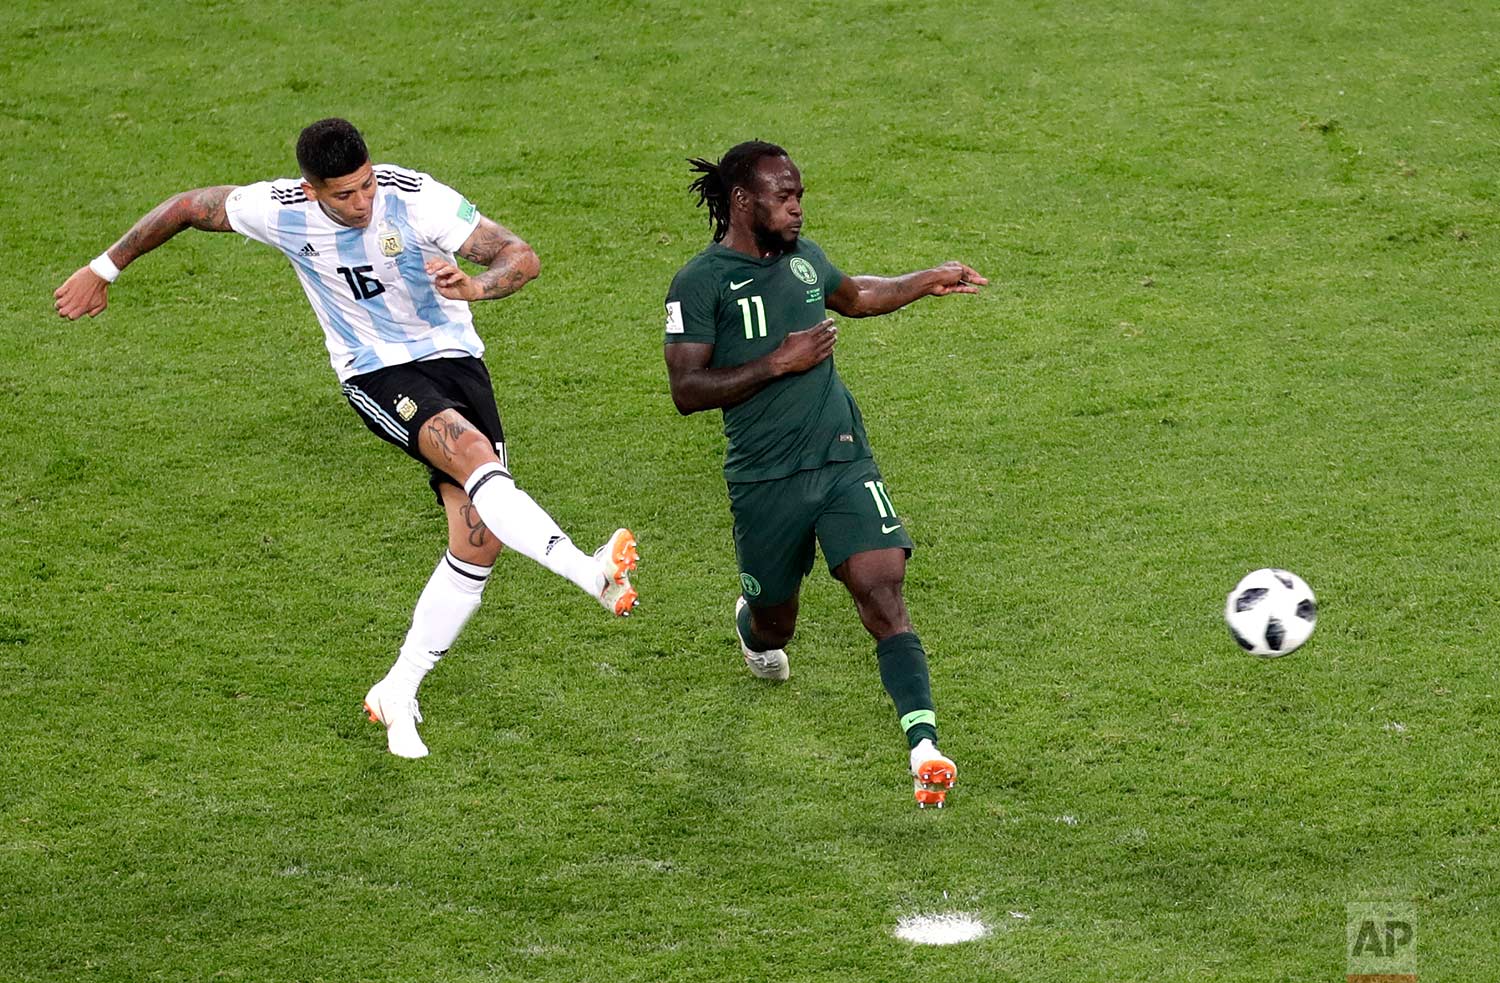  Argentina's Marcos Rojo, left, scores his side's second goal past Nigeria's Victor Moses during the group D match between Argentina and Nigeria, at the 2018 soccer World Cup in the St. Petersburg Stadium in St. Petersburg, Russia, Tuesday, June 26, 